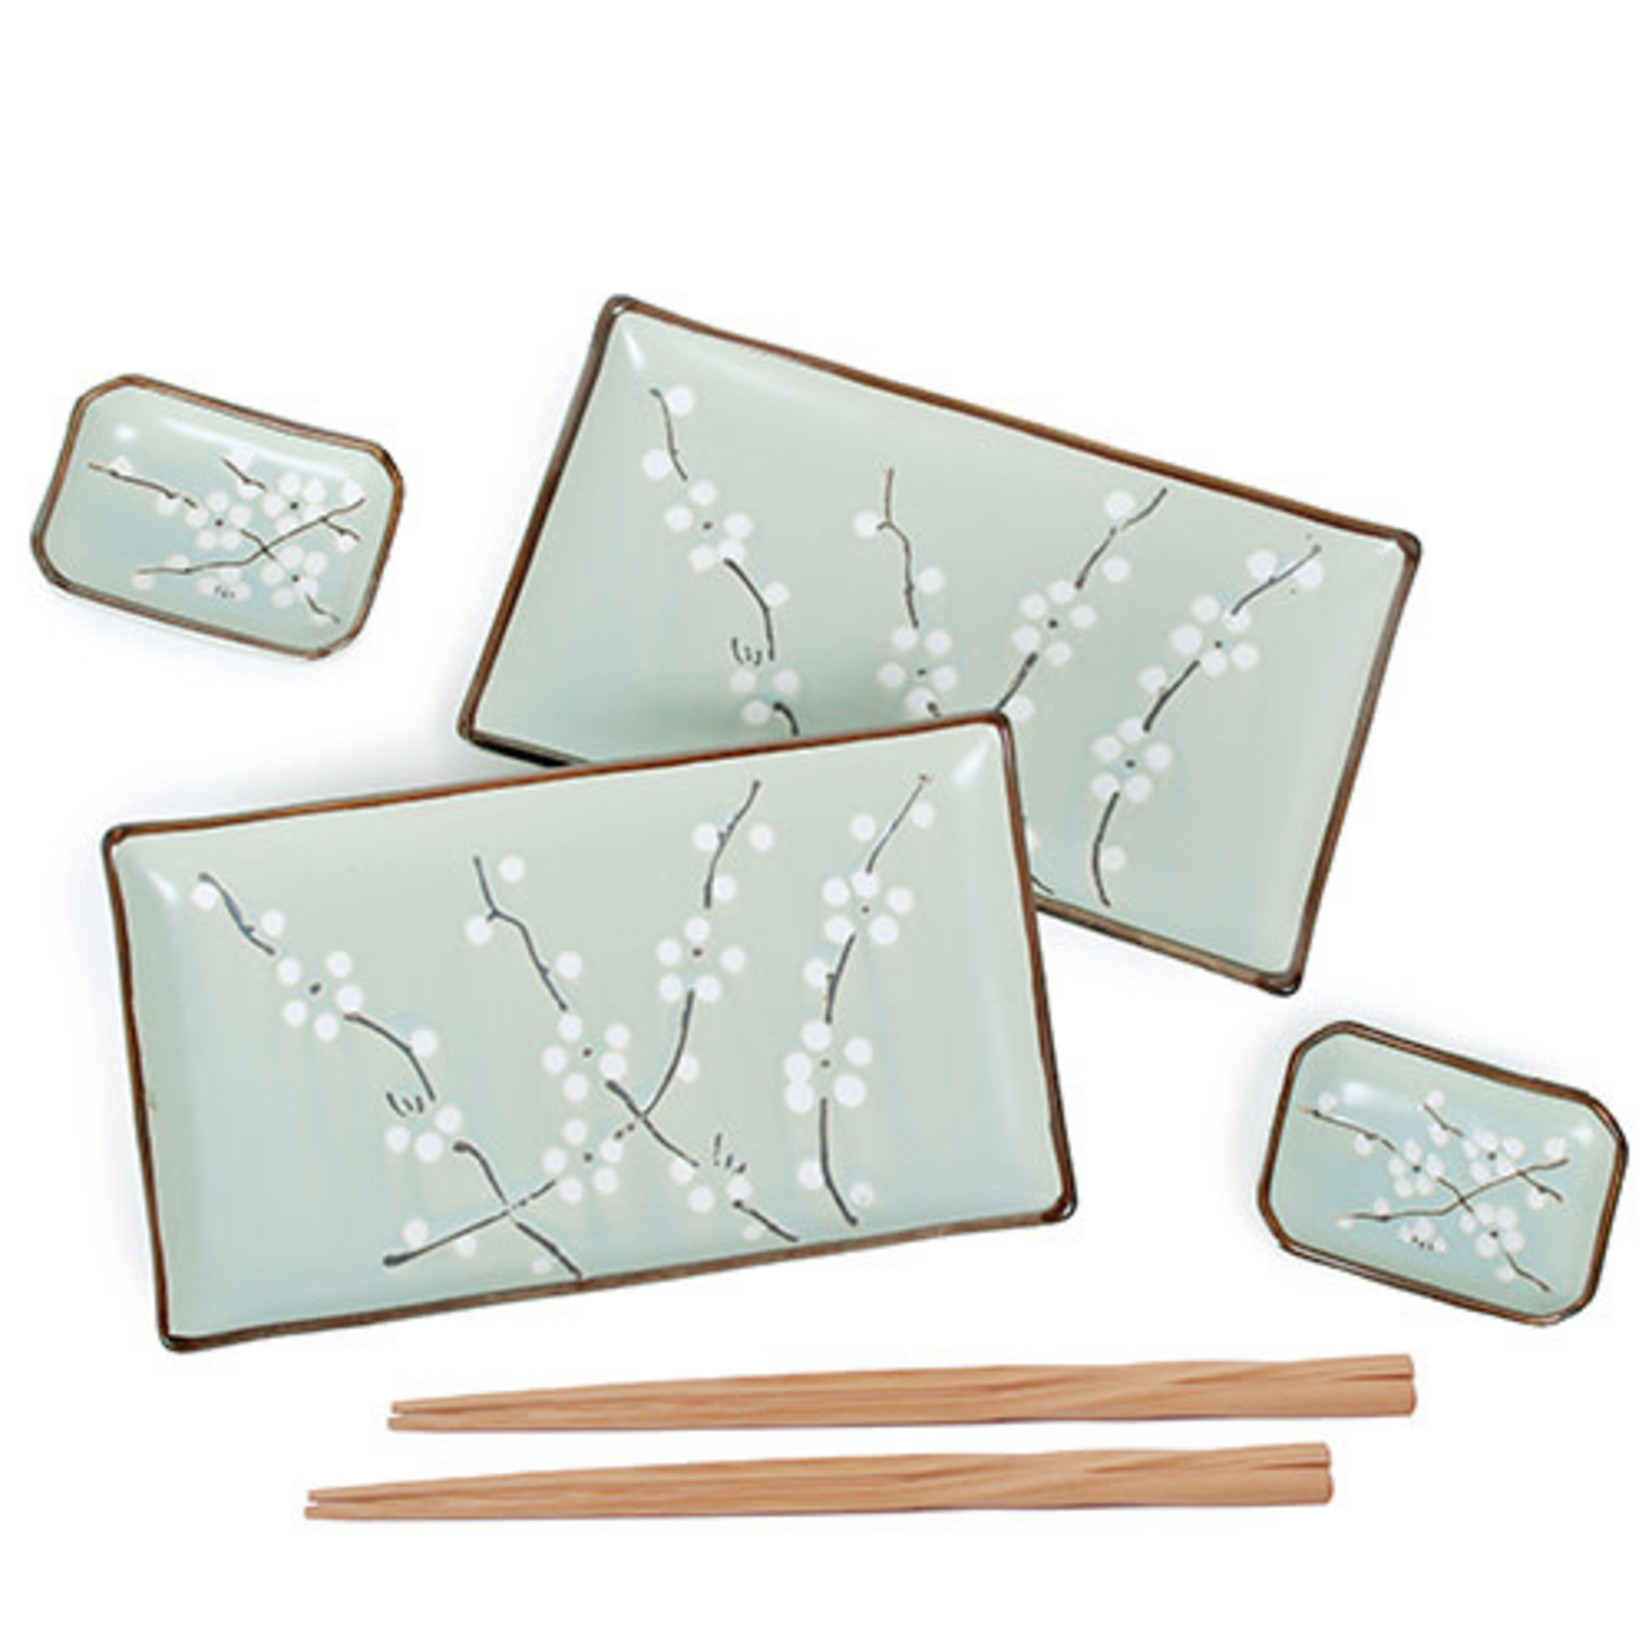 Sushi for Two - Ume (Plum) Pattern 6pc Set